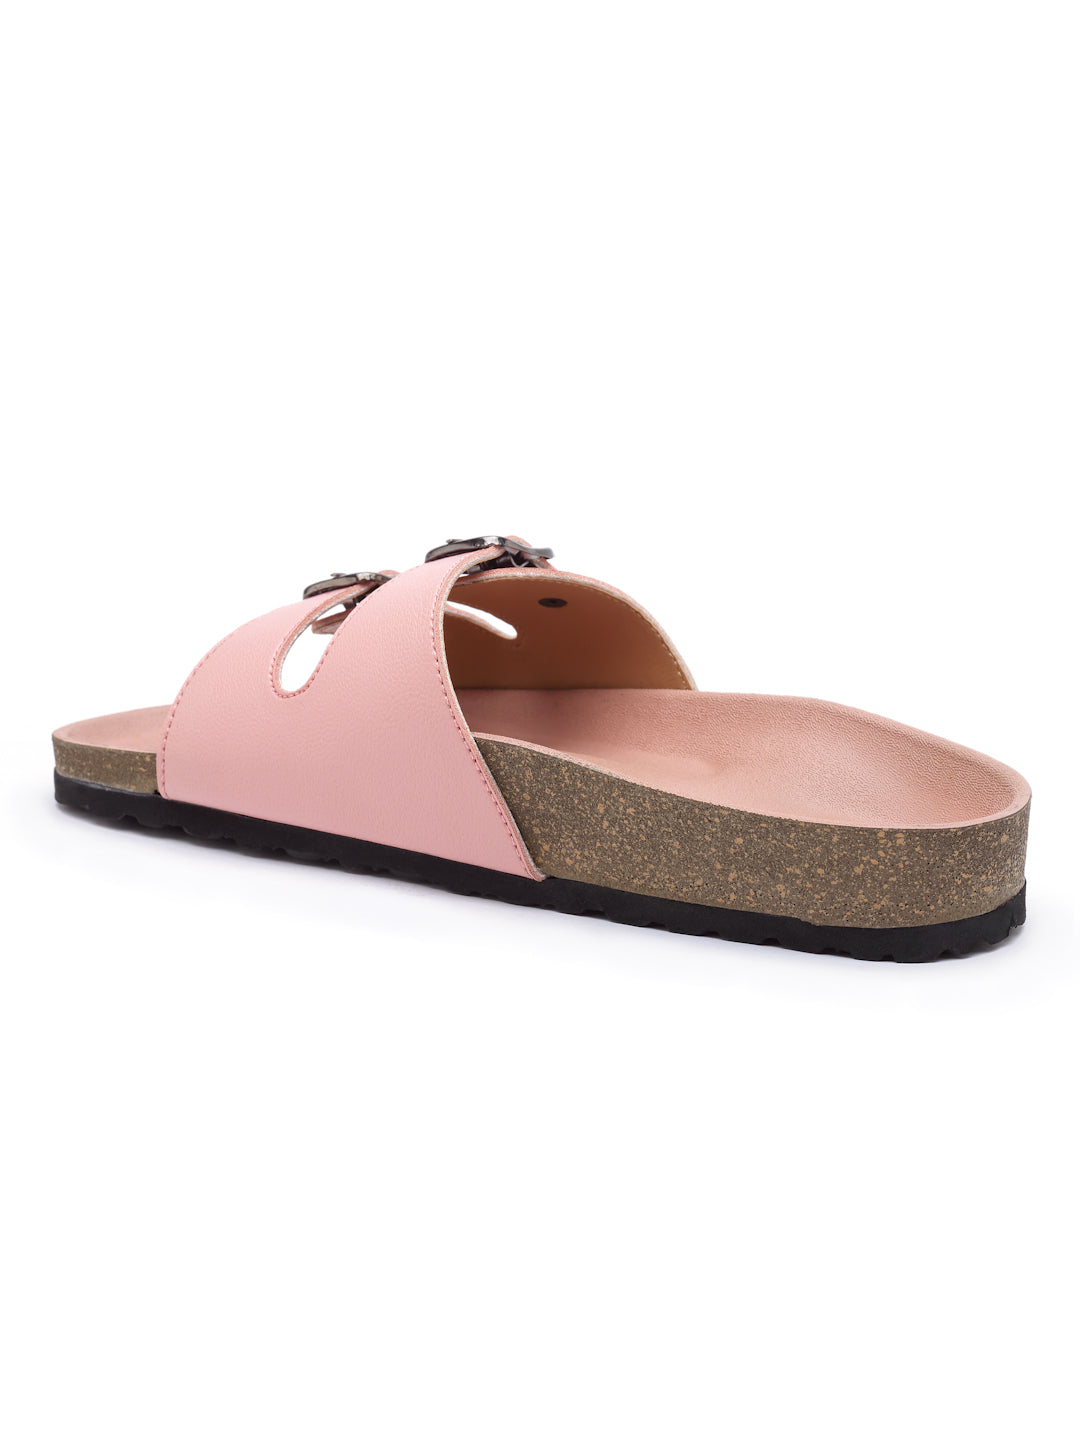 Women's Pink Synthetic Leather Casual Sandal